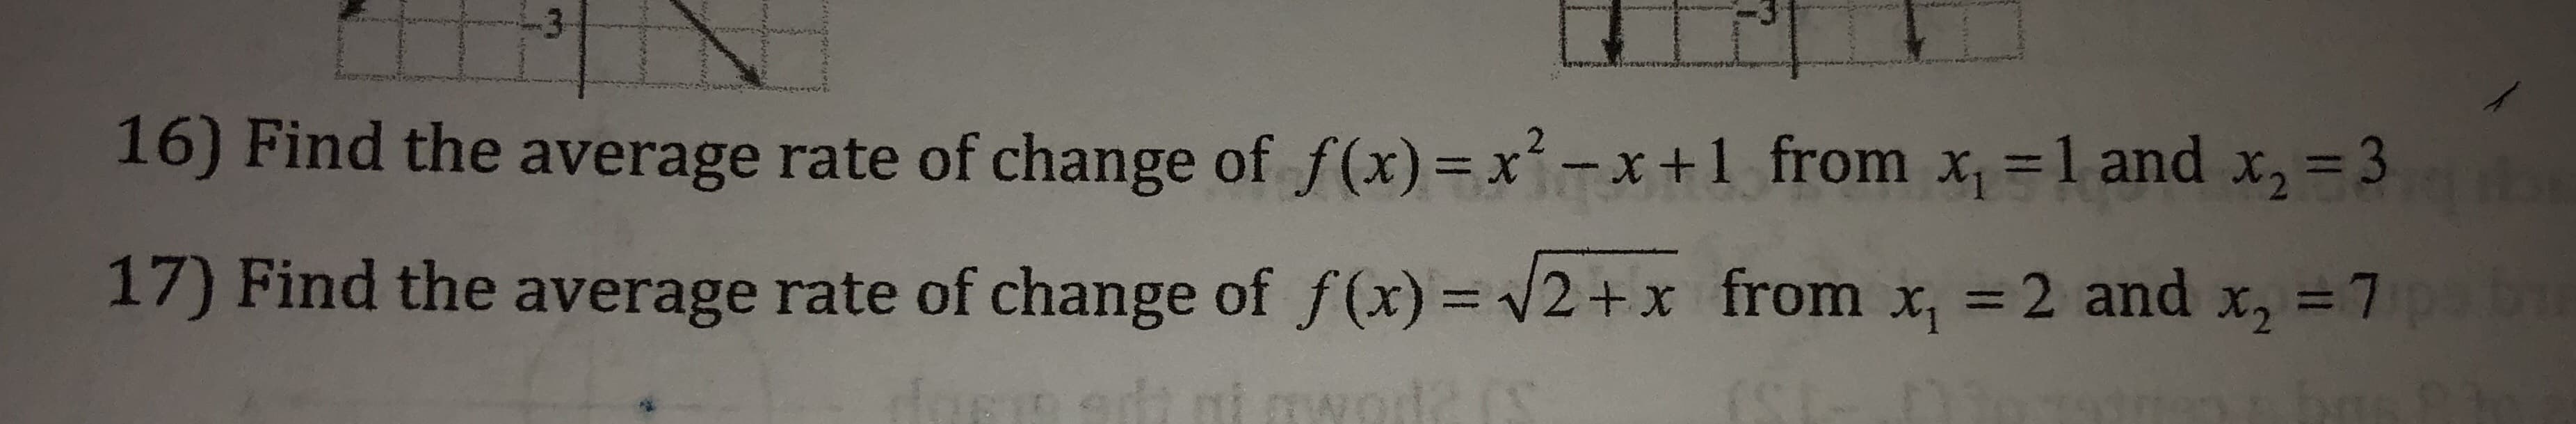 16) Find the average rate of change of f(x)xx+1 from x 1 and x,-3
17) Find the average rate of change of f(x) = +x from x| = 2 and x,-7
